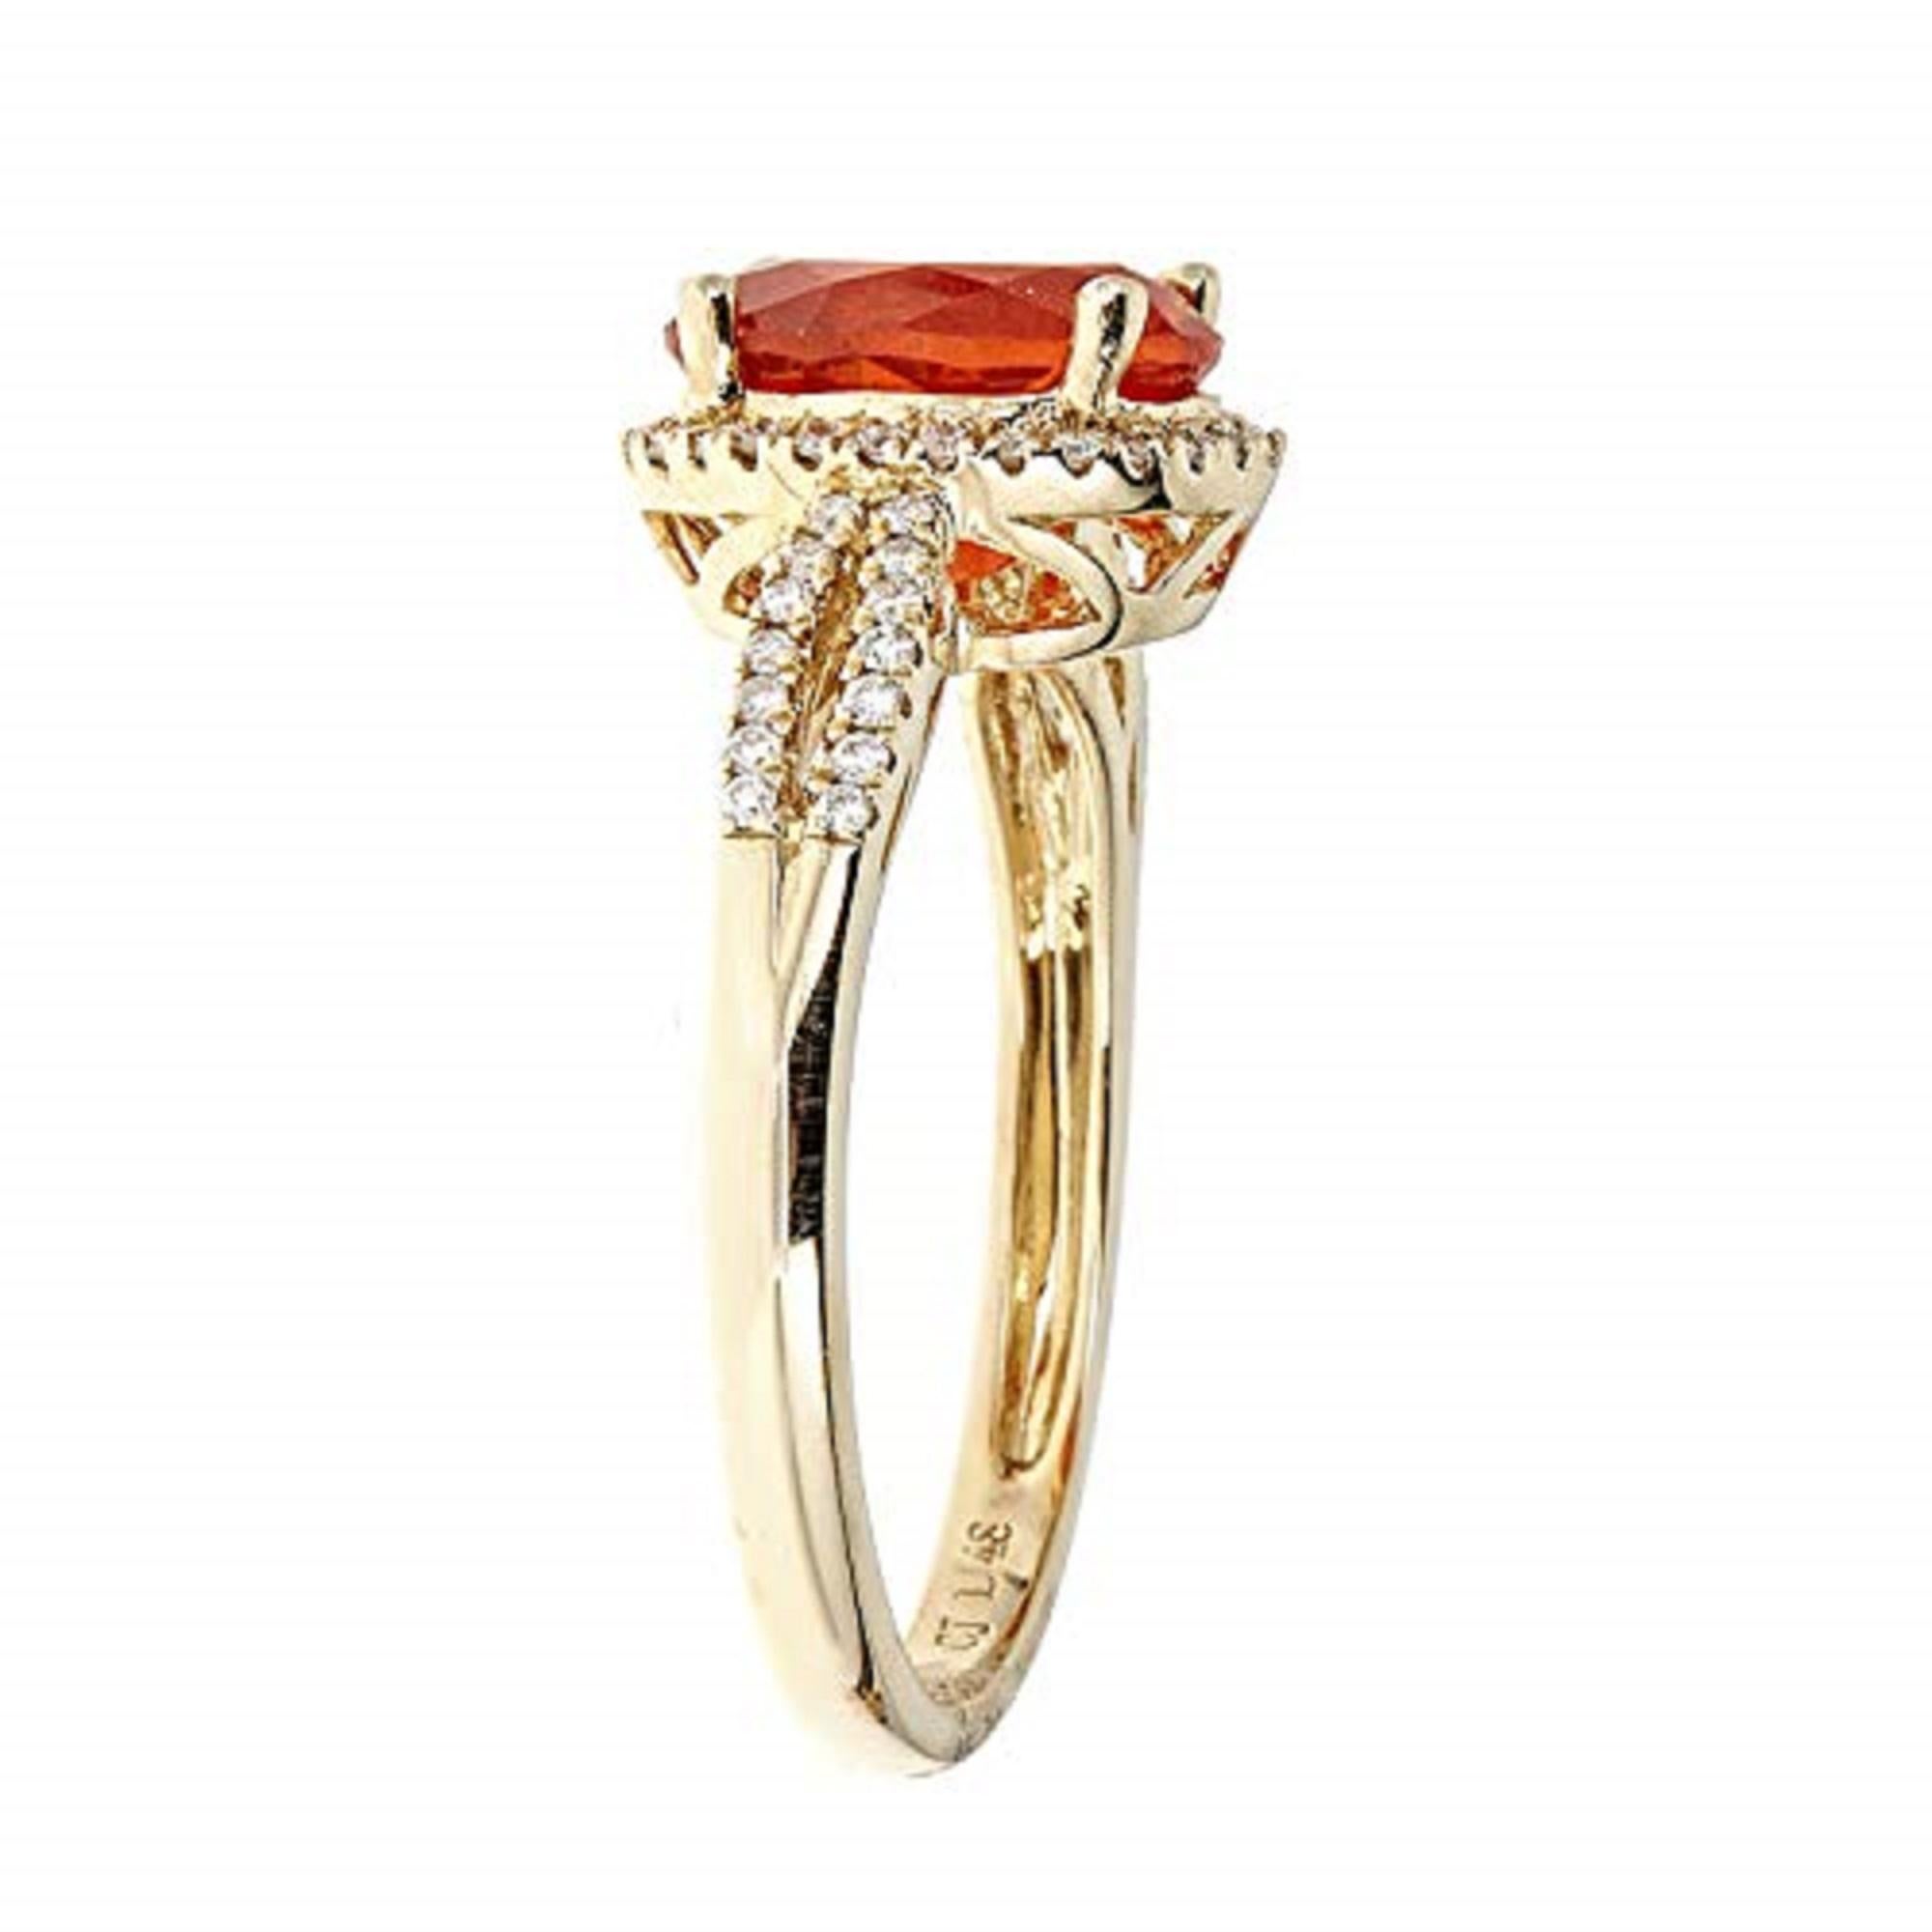 This Wedding ring from Gin & Grace features an oval-cut orange color Mexican Natural Fire Opal that will complement your loved one's unique sense of style. Crafted from 14k Yellow Gold and accented with round-cut diamonds for a glittering finish